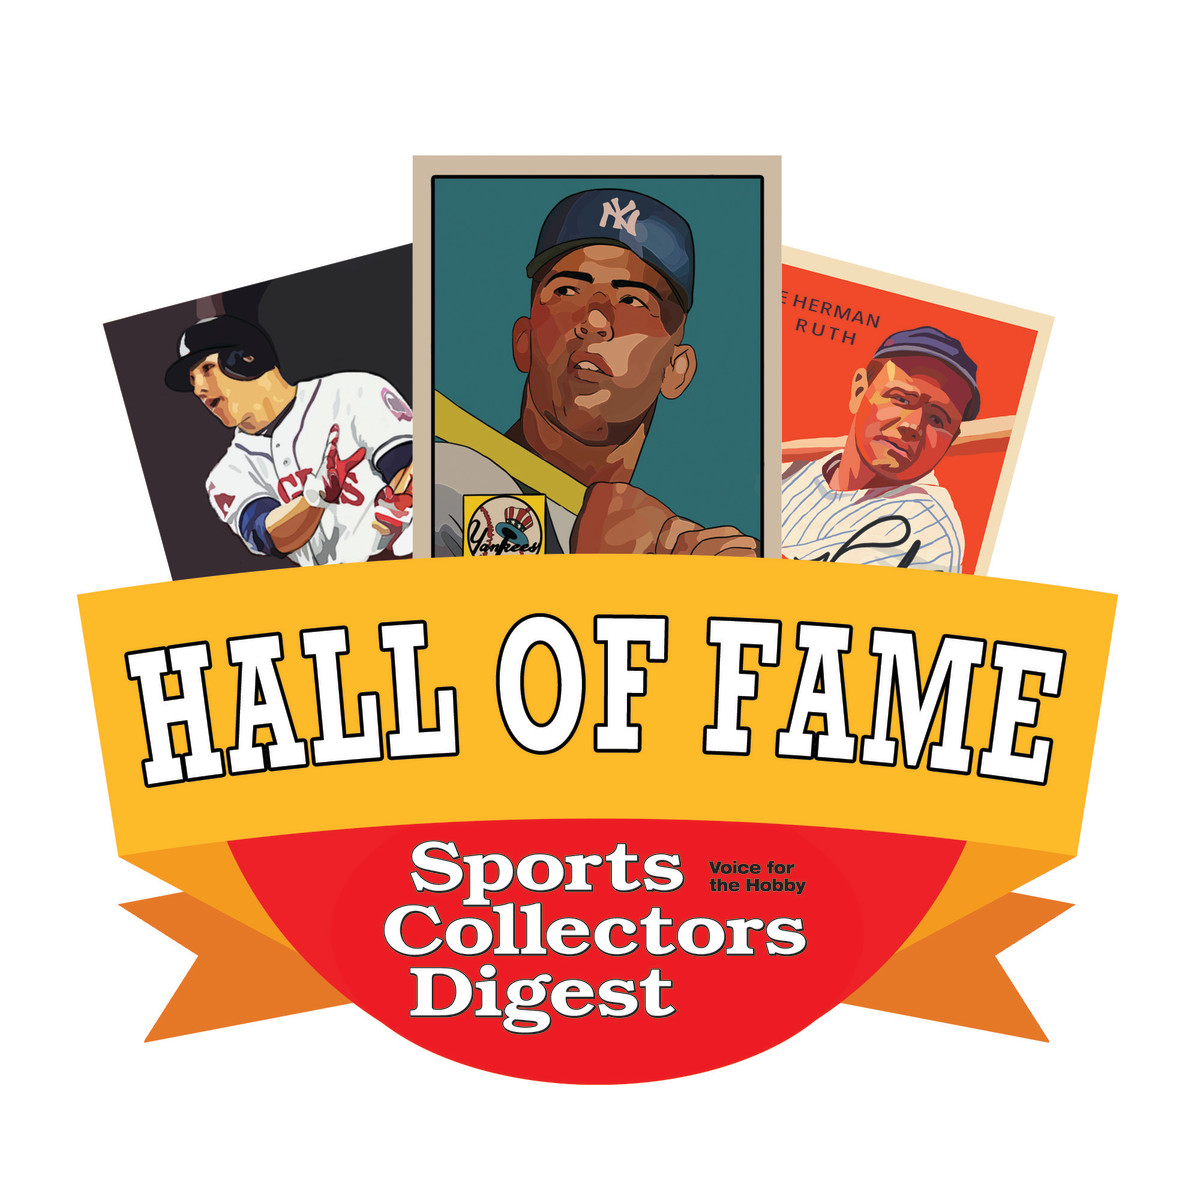 Sports Collectors Digest Hall of Fame logo.